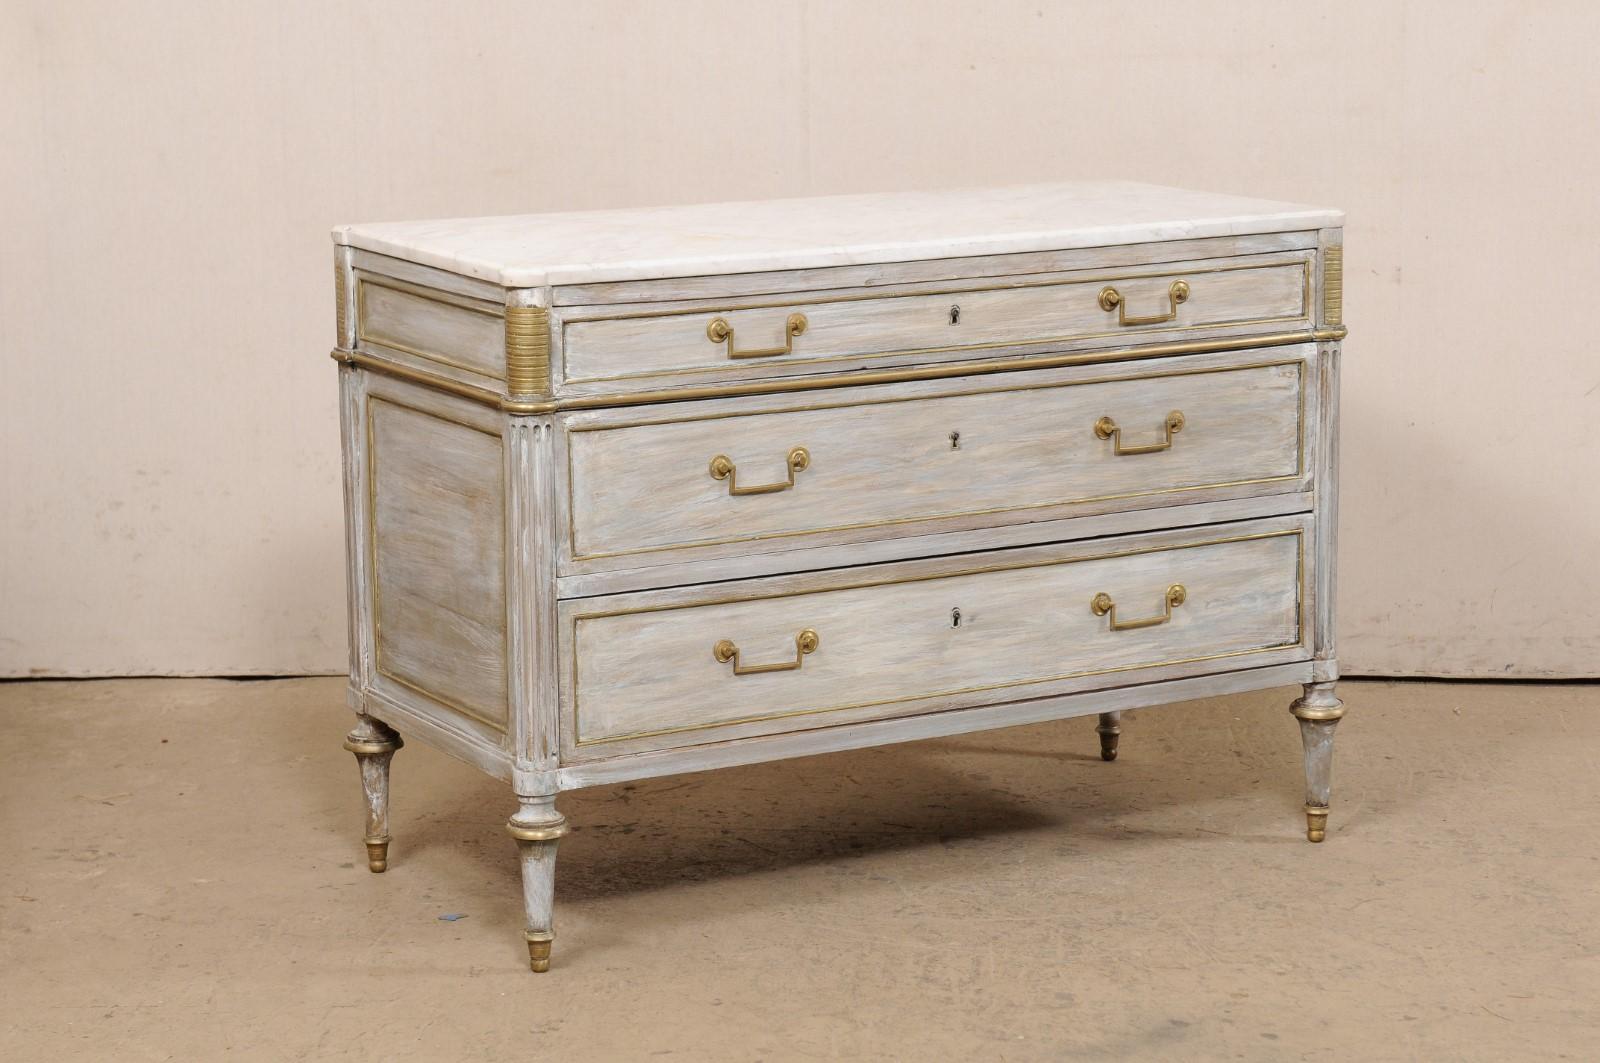 A French period Neoclassical commode with brass accents from the early 19th century. This antique chest from France features a rectangular-shaped marble top, with pronounced rounded corners at front, which rests atop a neoclassical case with rounded